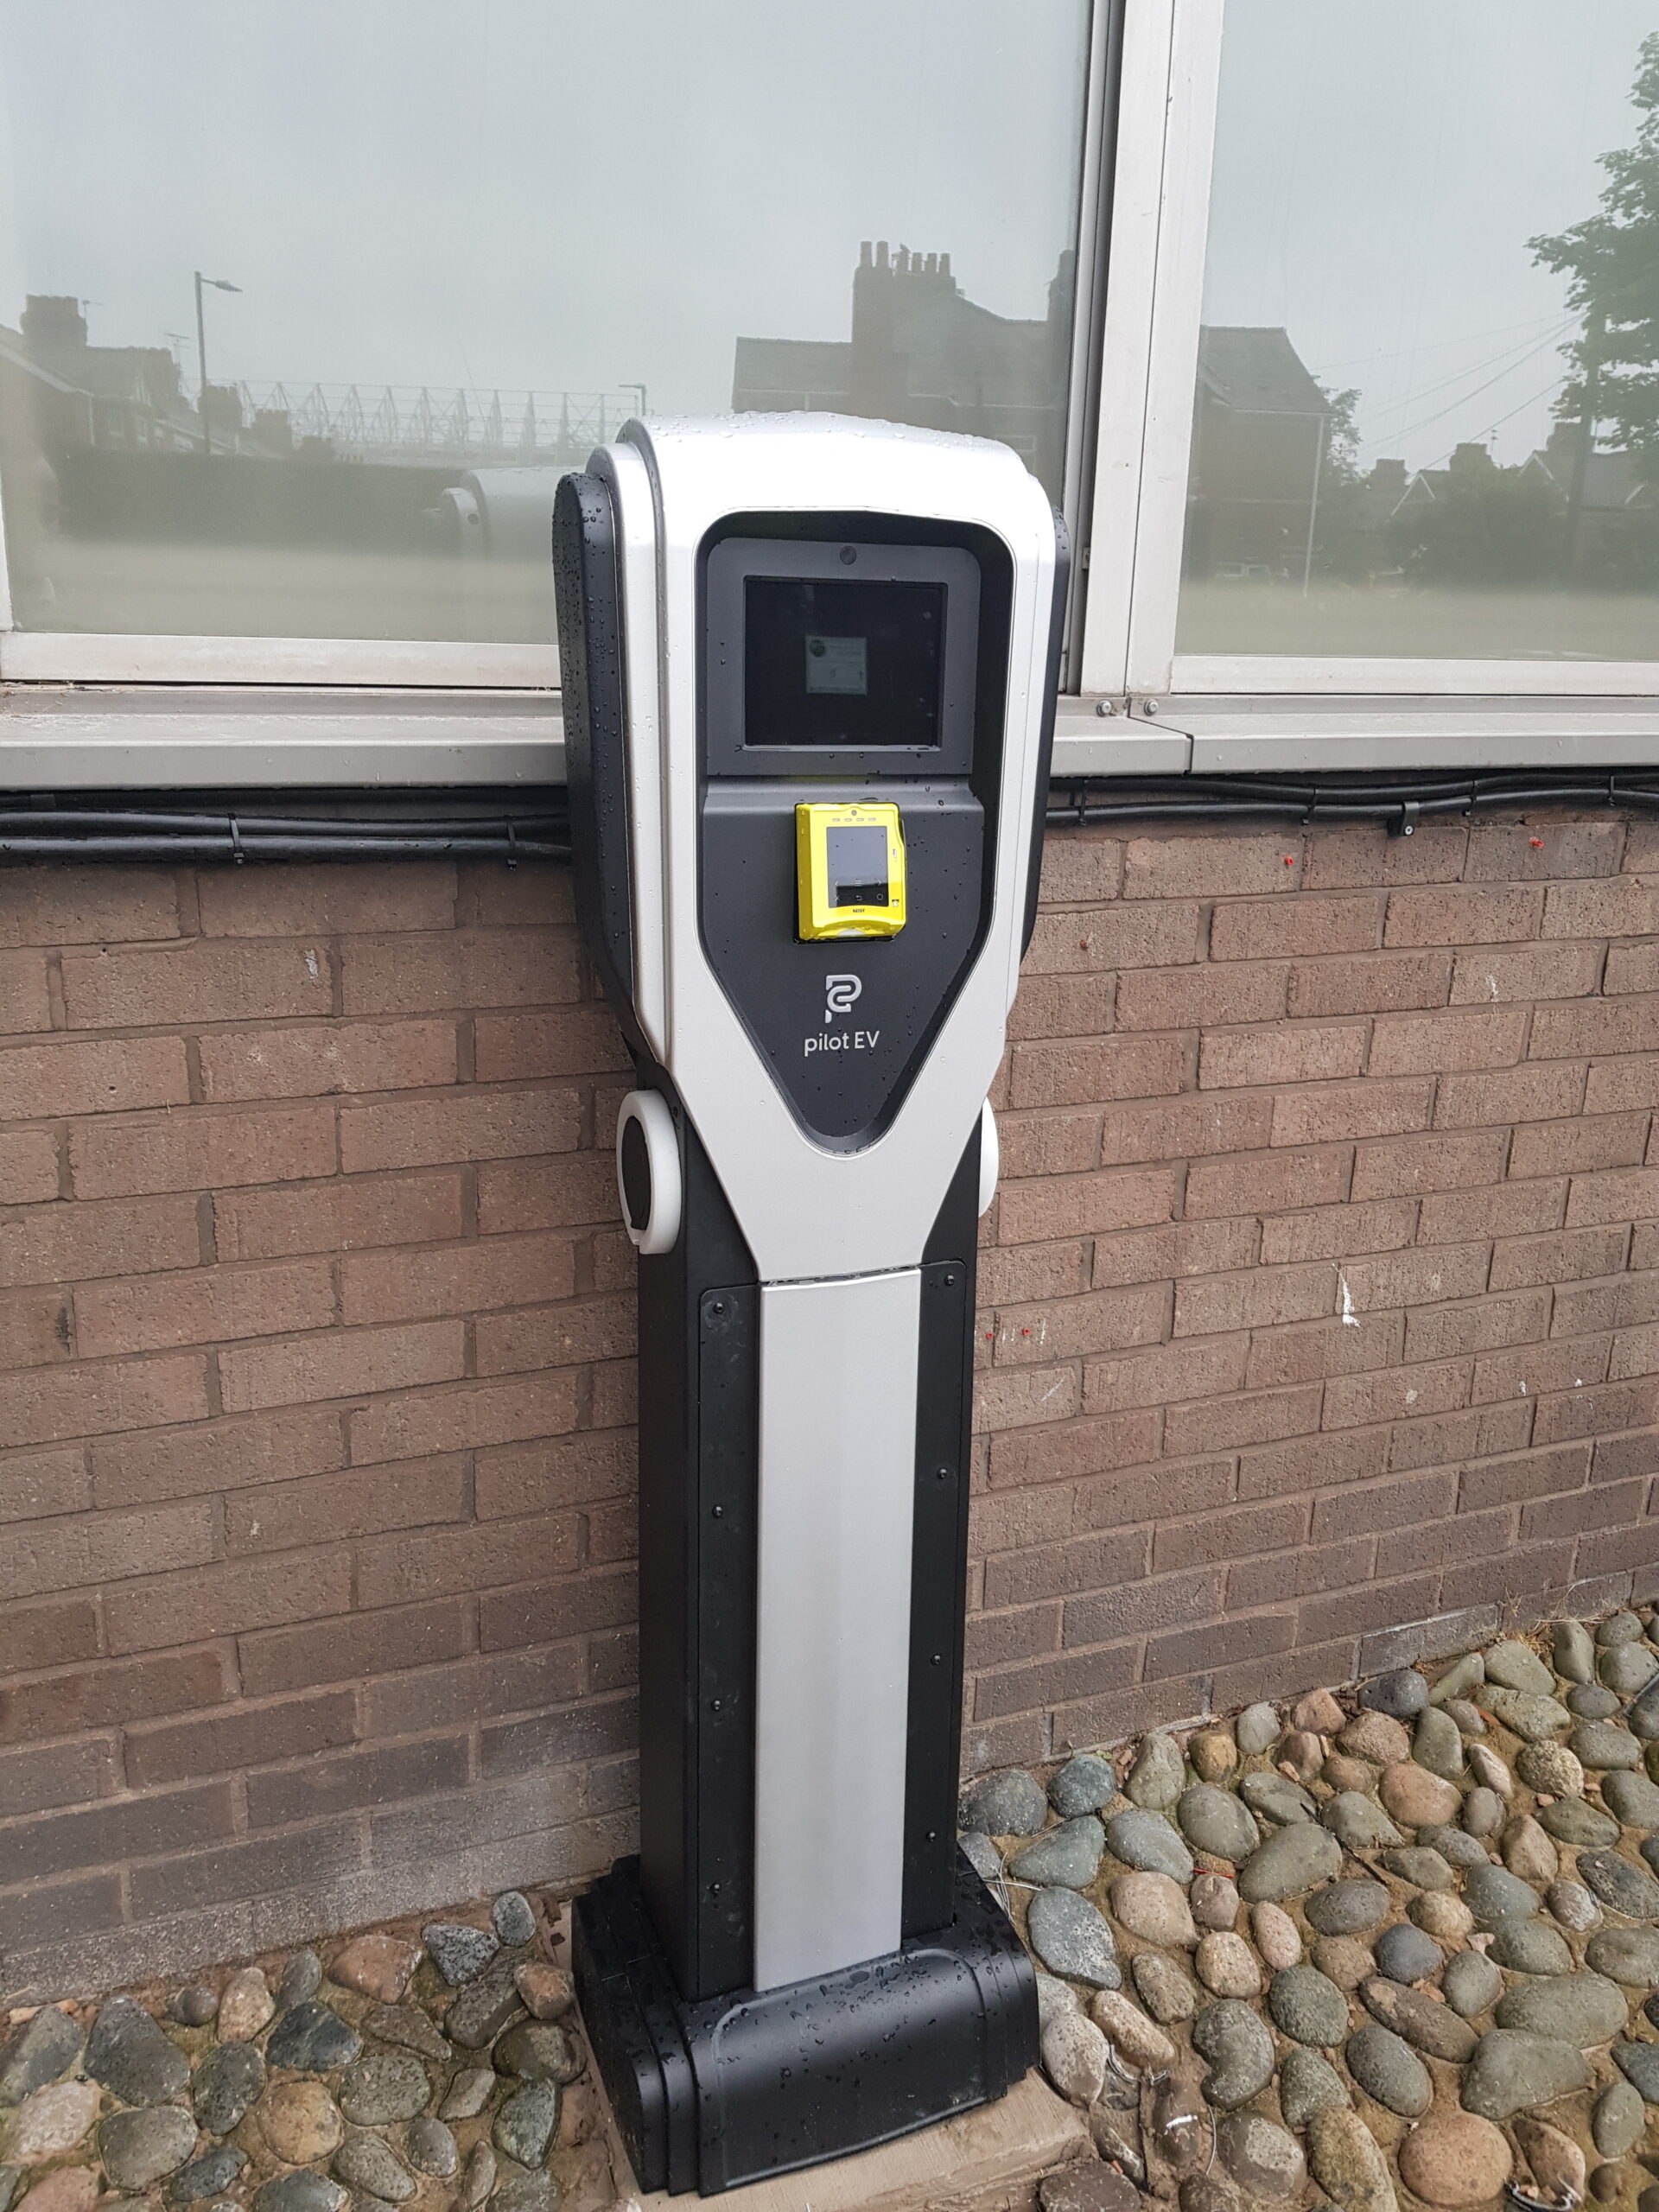 Electric vehicle charging points trial rolled out across Bruntwood’s